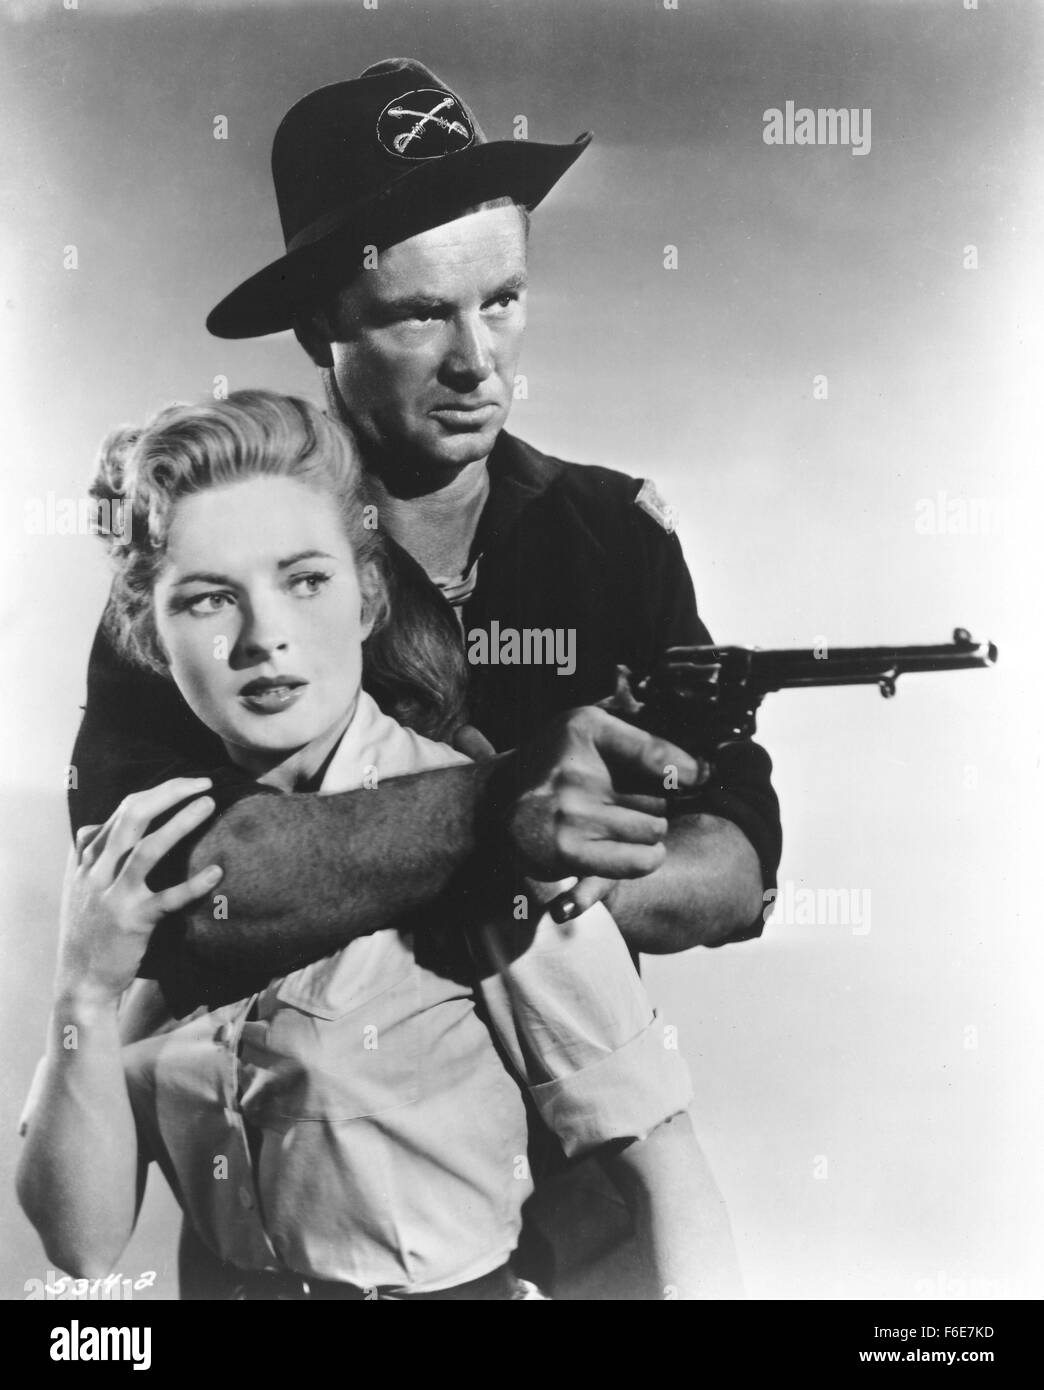 RELEASE DATE: April 25, 1954. MOVIE TITLE: Arrow in the Dust. STUDIO: Allied Artists Pictures. PLOT: . PICTURED: STERLING HAYDEN as Bart Lash and COLEEN GRAY as Christella Burke. Stock Photo